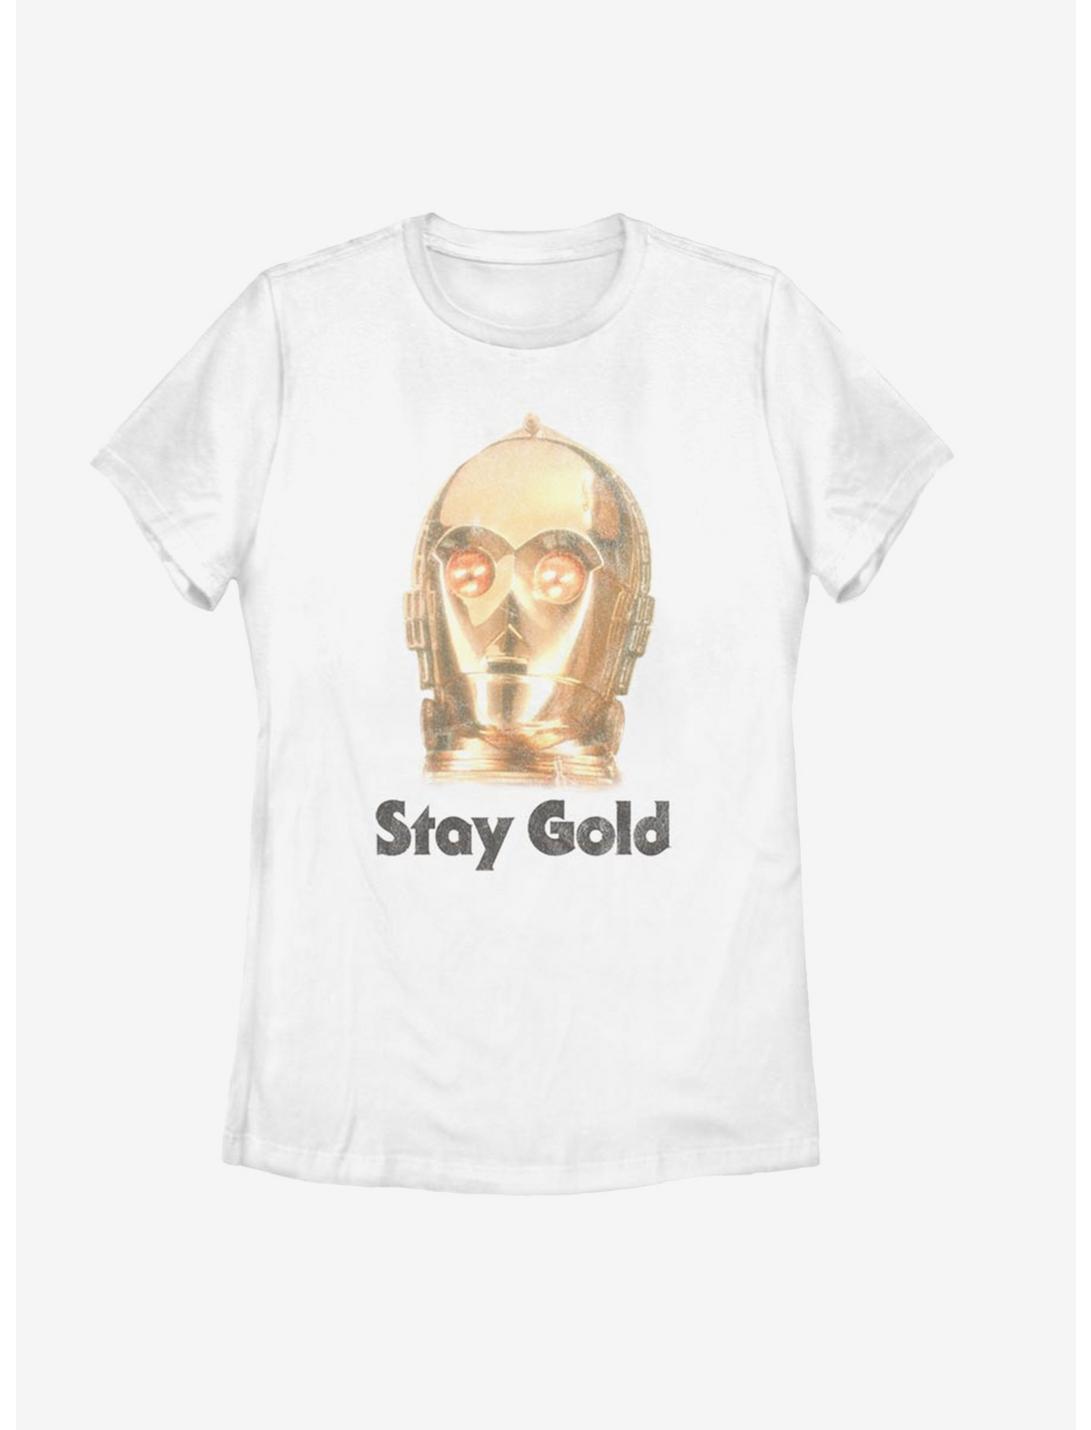 Star Wars Episode IX The Rise Of Skywalker Stay Gold Womens T-Shirt, WHITE, hi-res